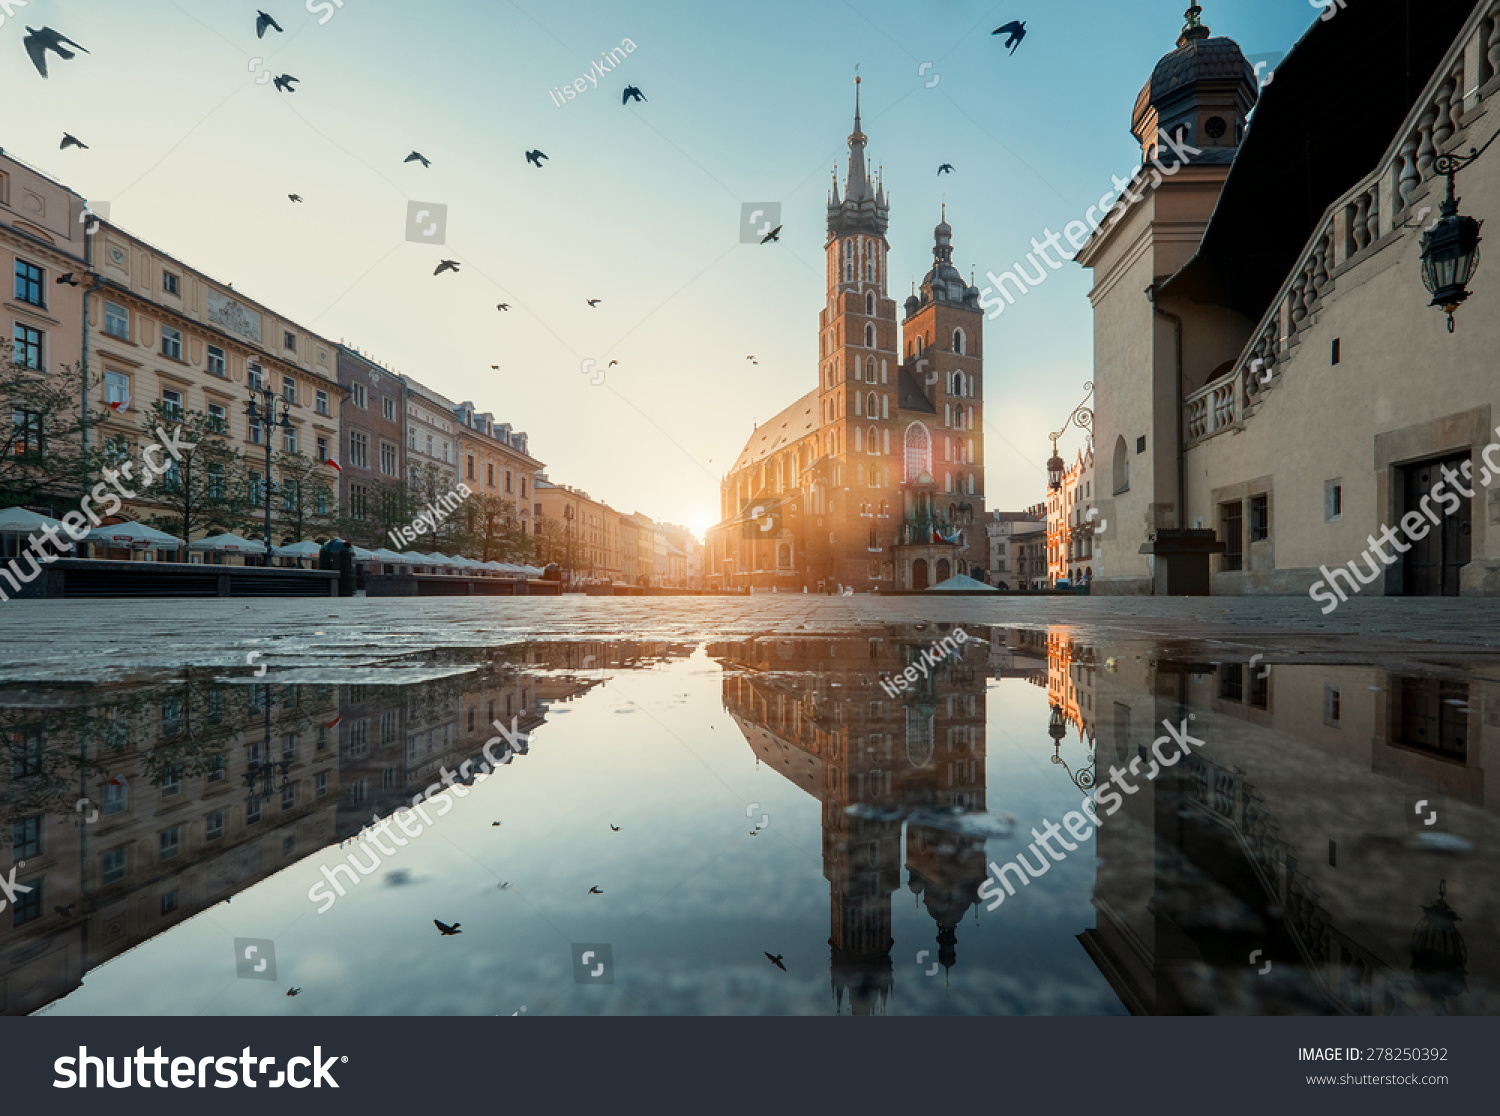 Market square and St. Mary's Basilica in Krakow, Poland. #278250392